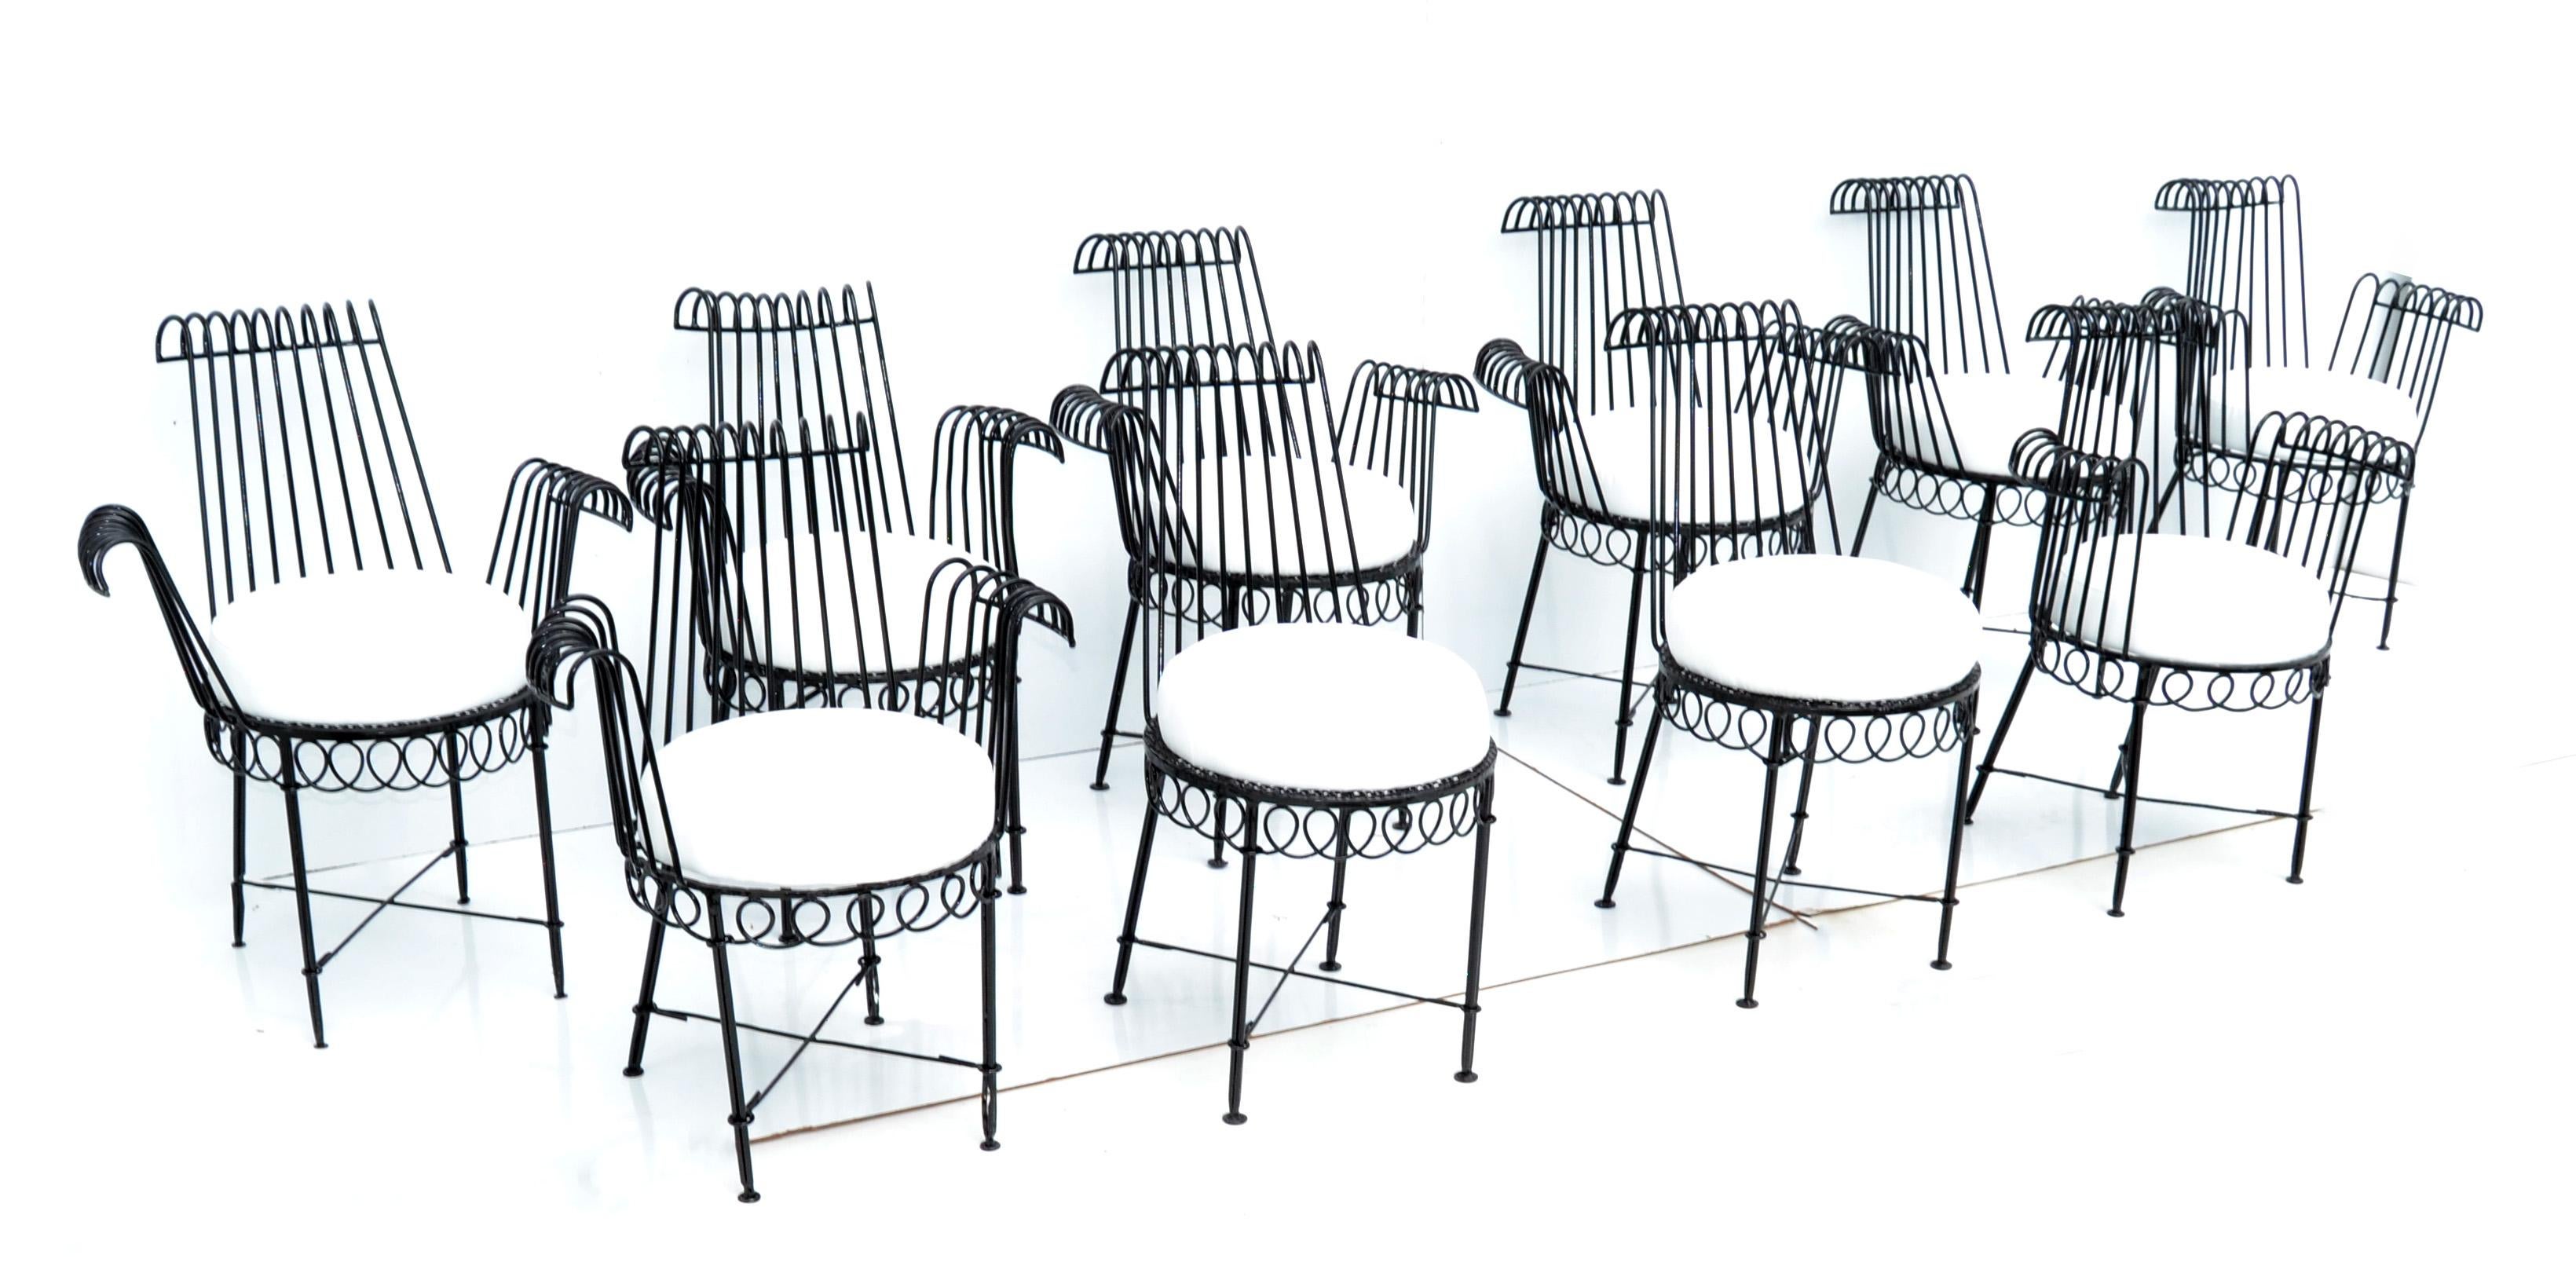 Superb dining room set from Mathieu Matégot Design Cap d’ Ail from the 1950s and made in France.
The set contains 6 armchairs in stunning handcrafted wrought iron. 
Can be use inside or Outdoors as Patio and Garden Furniture, Restaurant, Bistro.